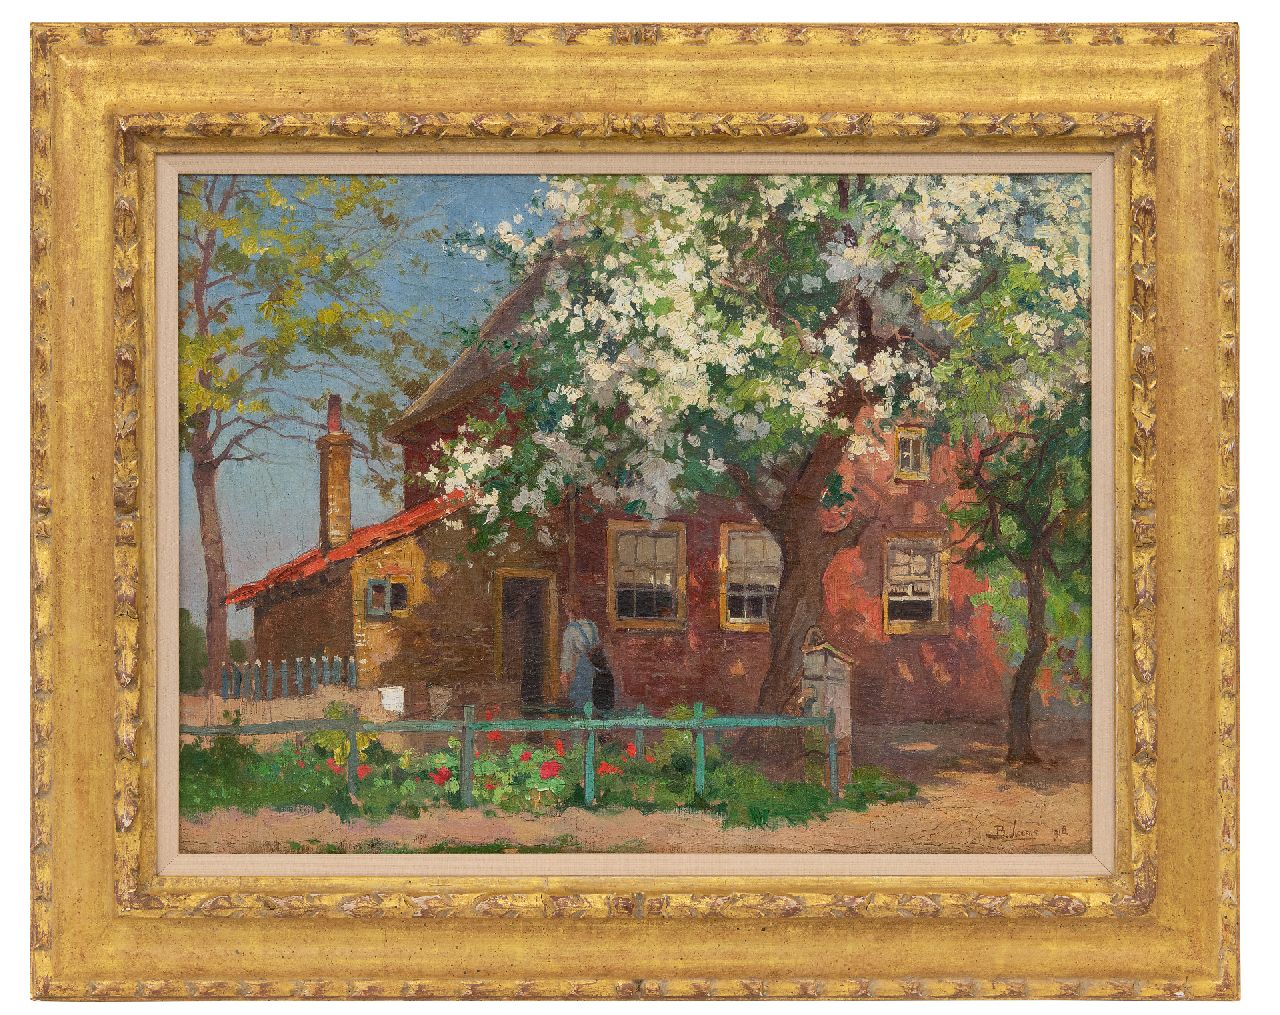 Viegers B.P.  | Bernardus Petrus 'Ben' Viegers | Paintings offered for sale | A farmyard in spring, oil on canvas 37.2 x 50.2 cm, signed l.r. and painted 1918